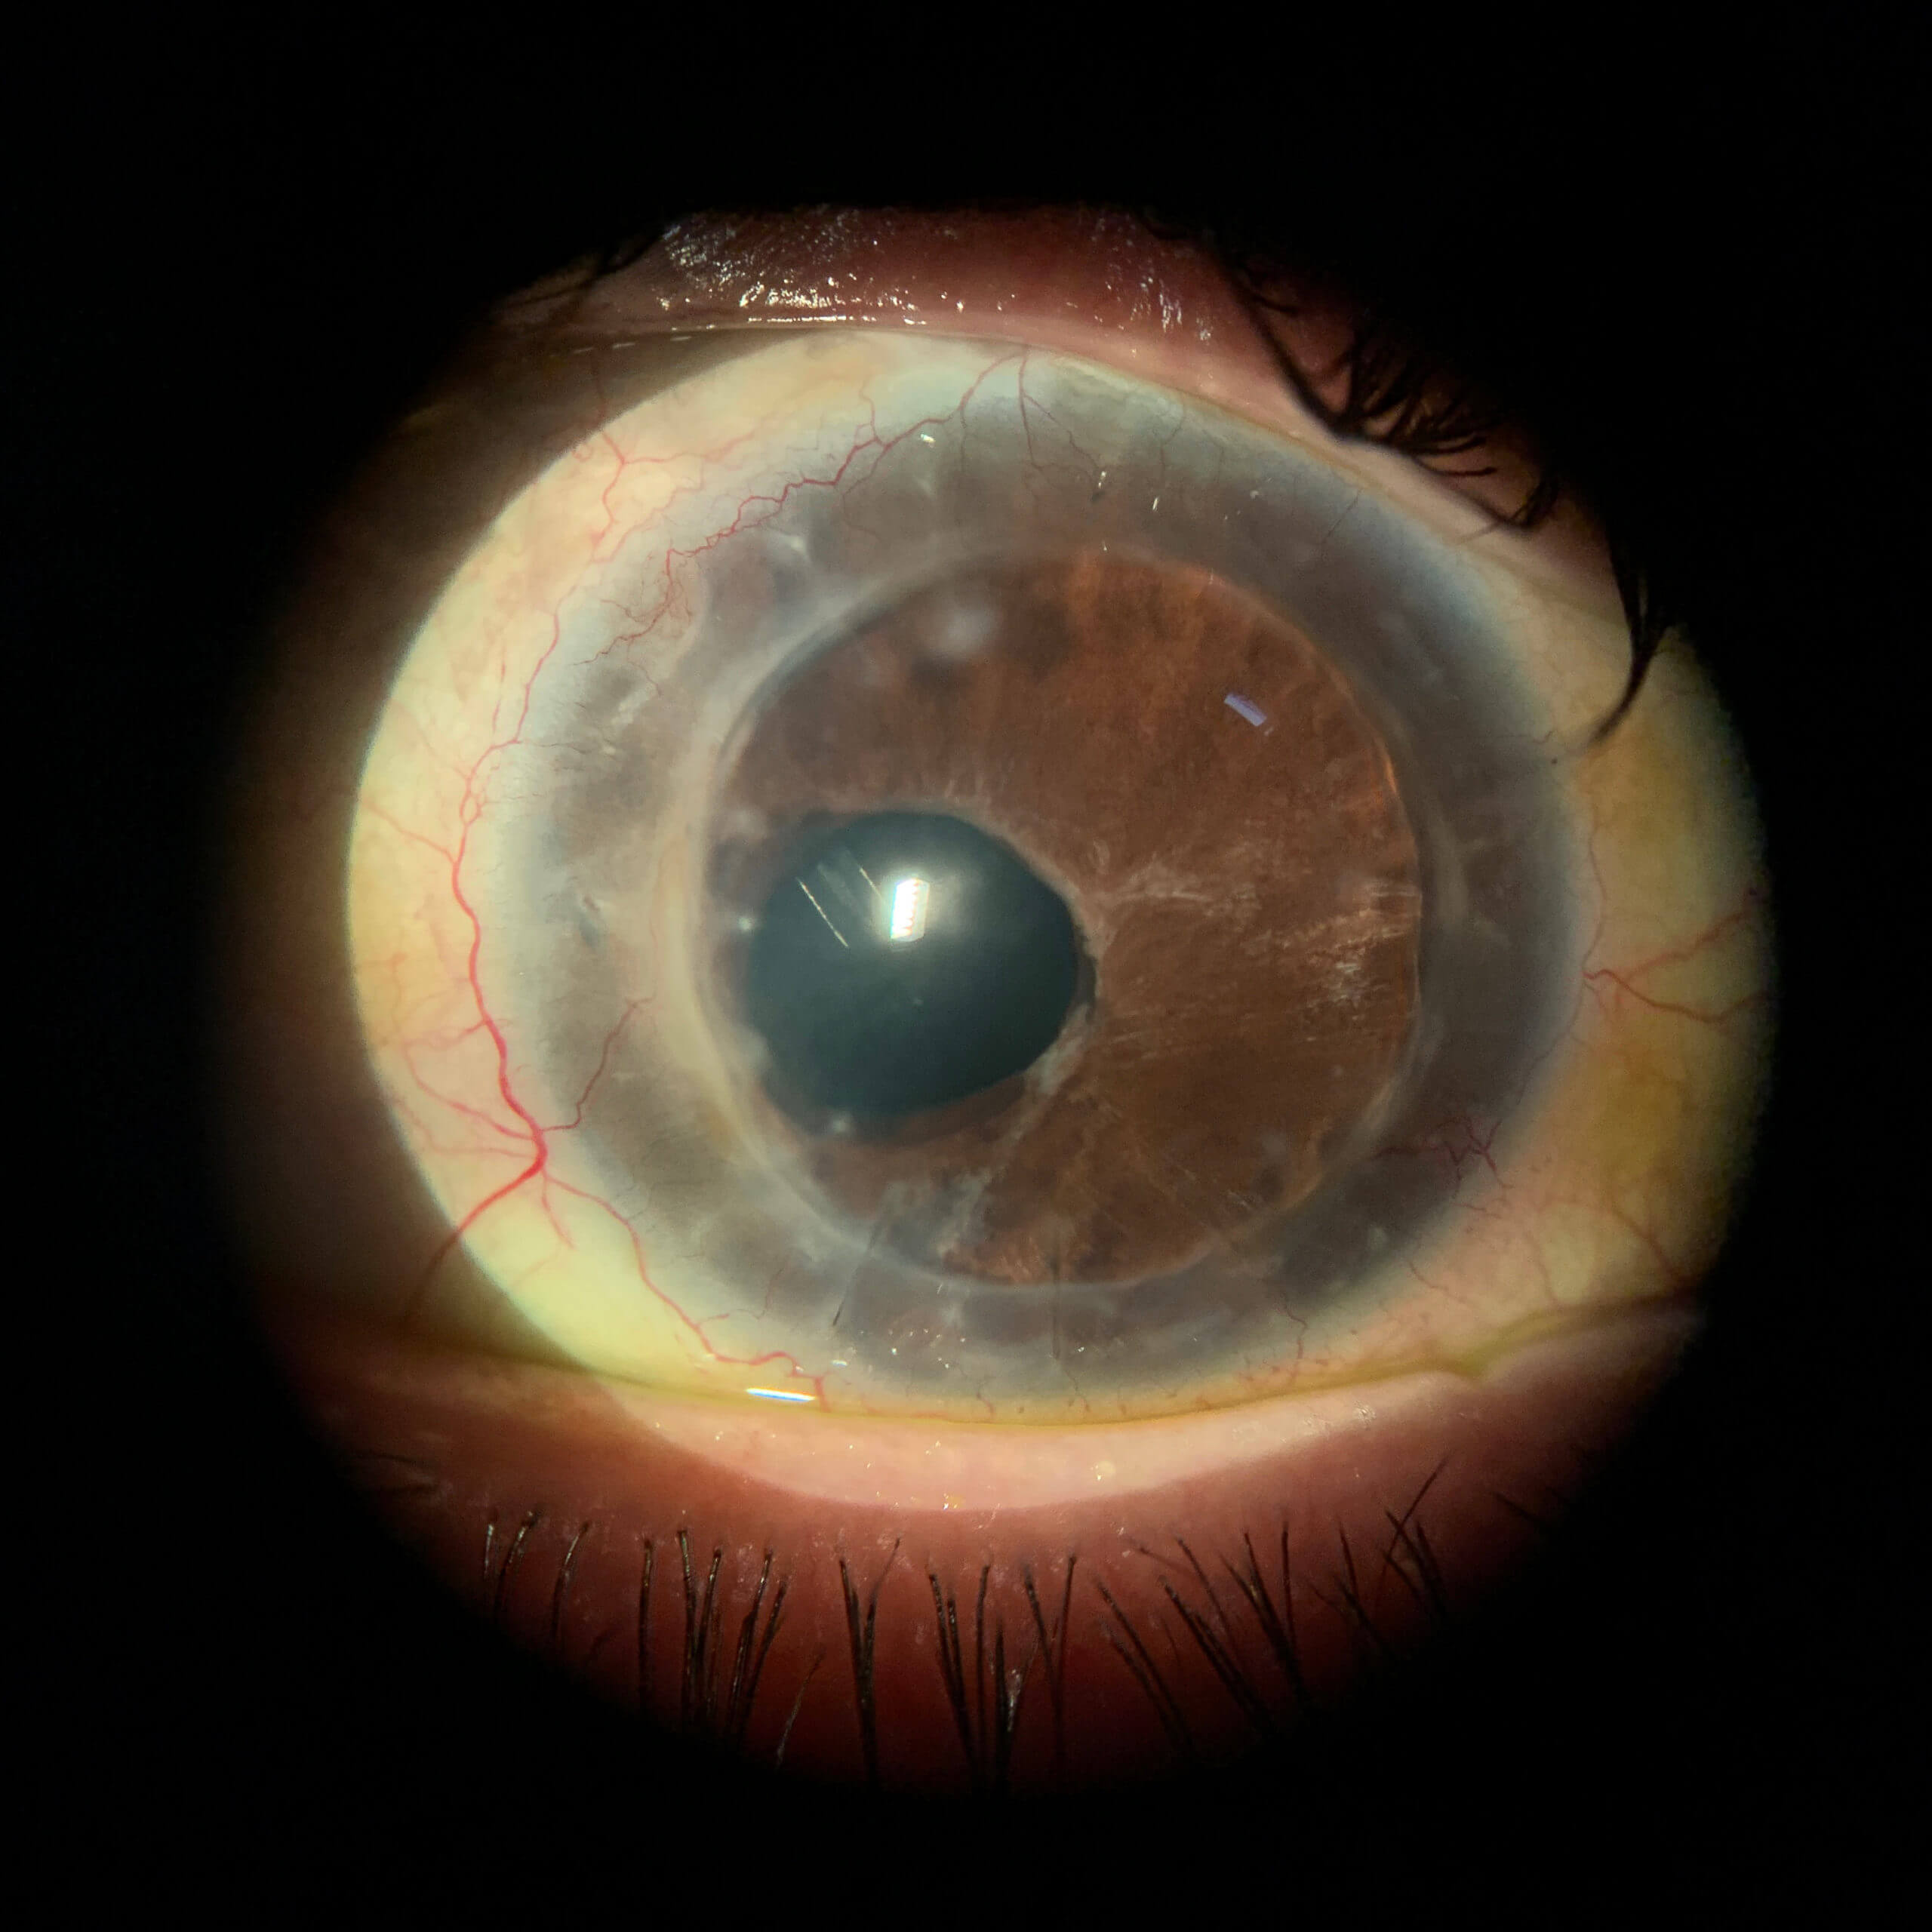 OD corneal transplant with decentered pupil and tube